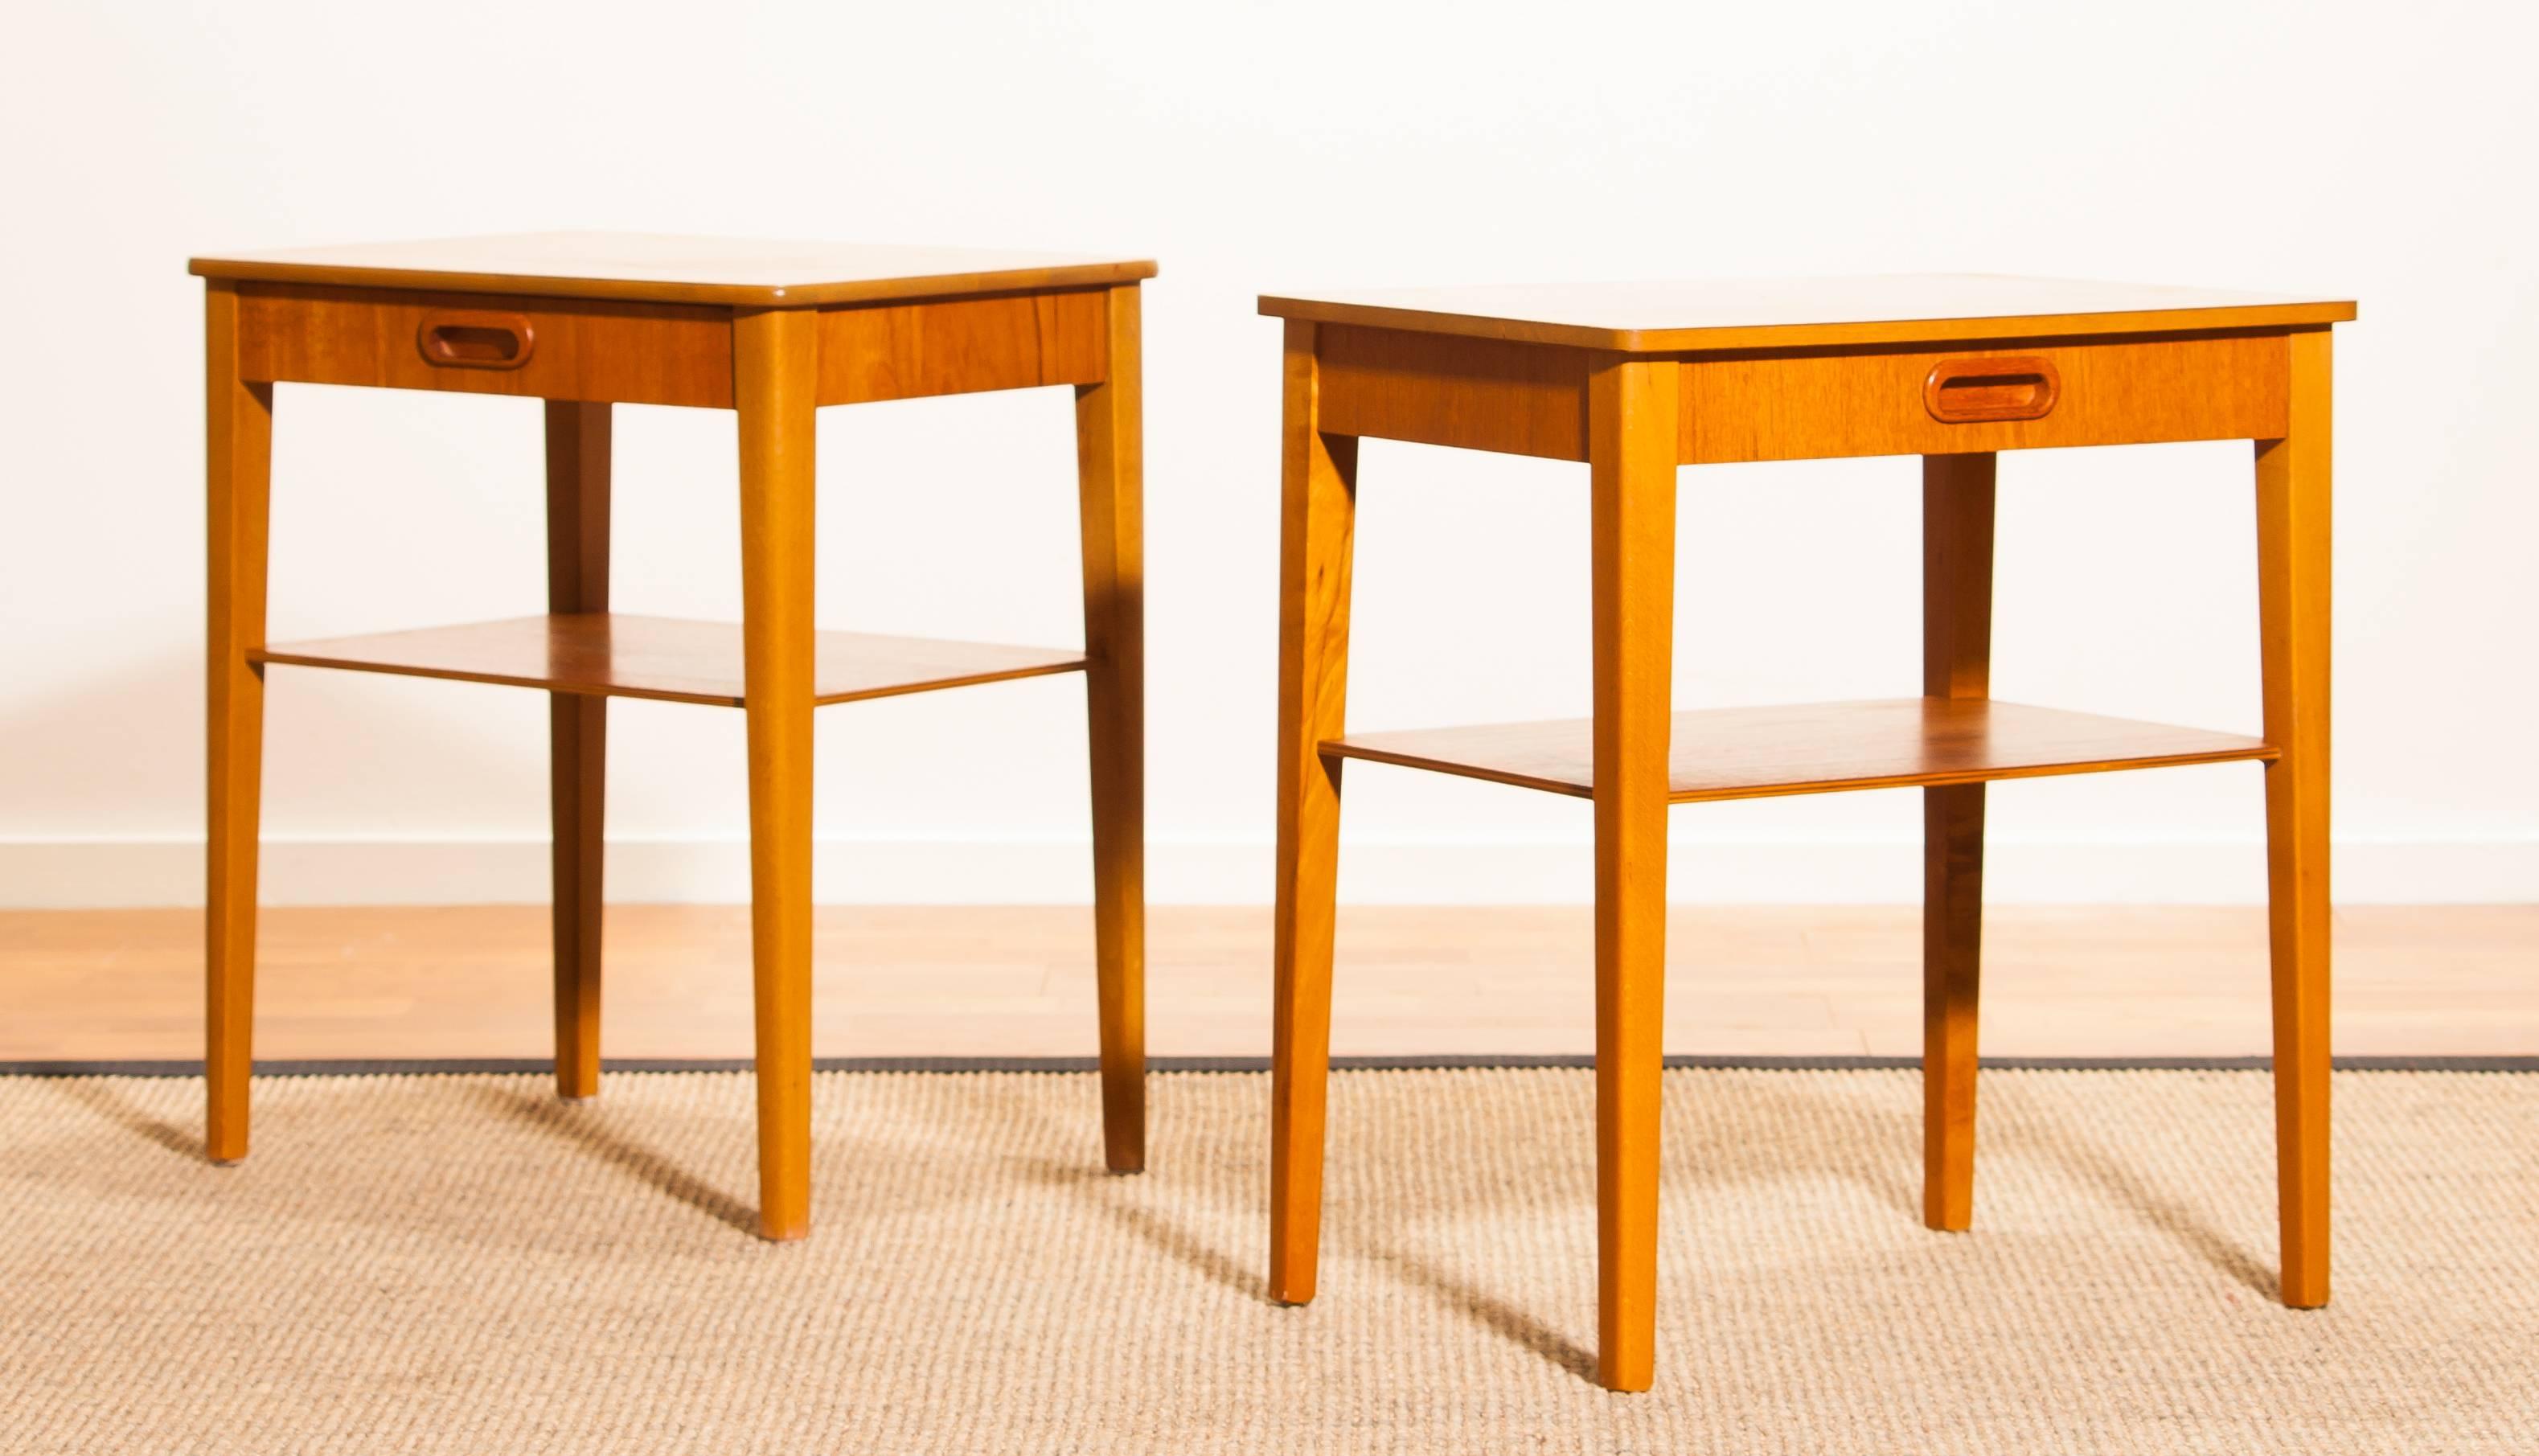 Beautiful pair of bedside tables by Björkås Möbelfabrik Sweden.
They are made of teak, with single drawer and magazine shelf.
The tables are in a very nice condition.
Period 1950s
Dimensions H.50 cm, W.45 cm, D.32 cm